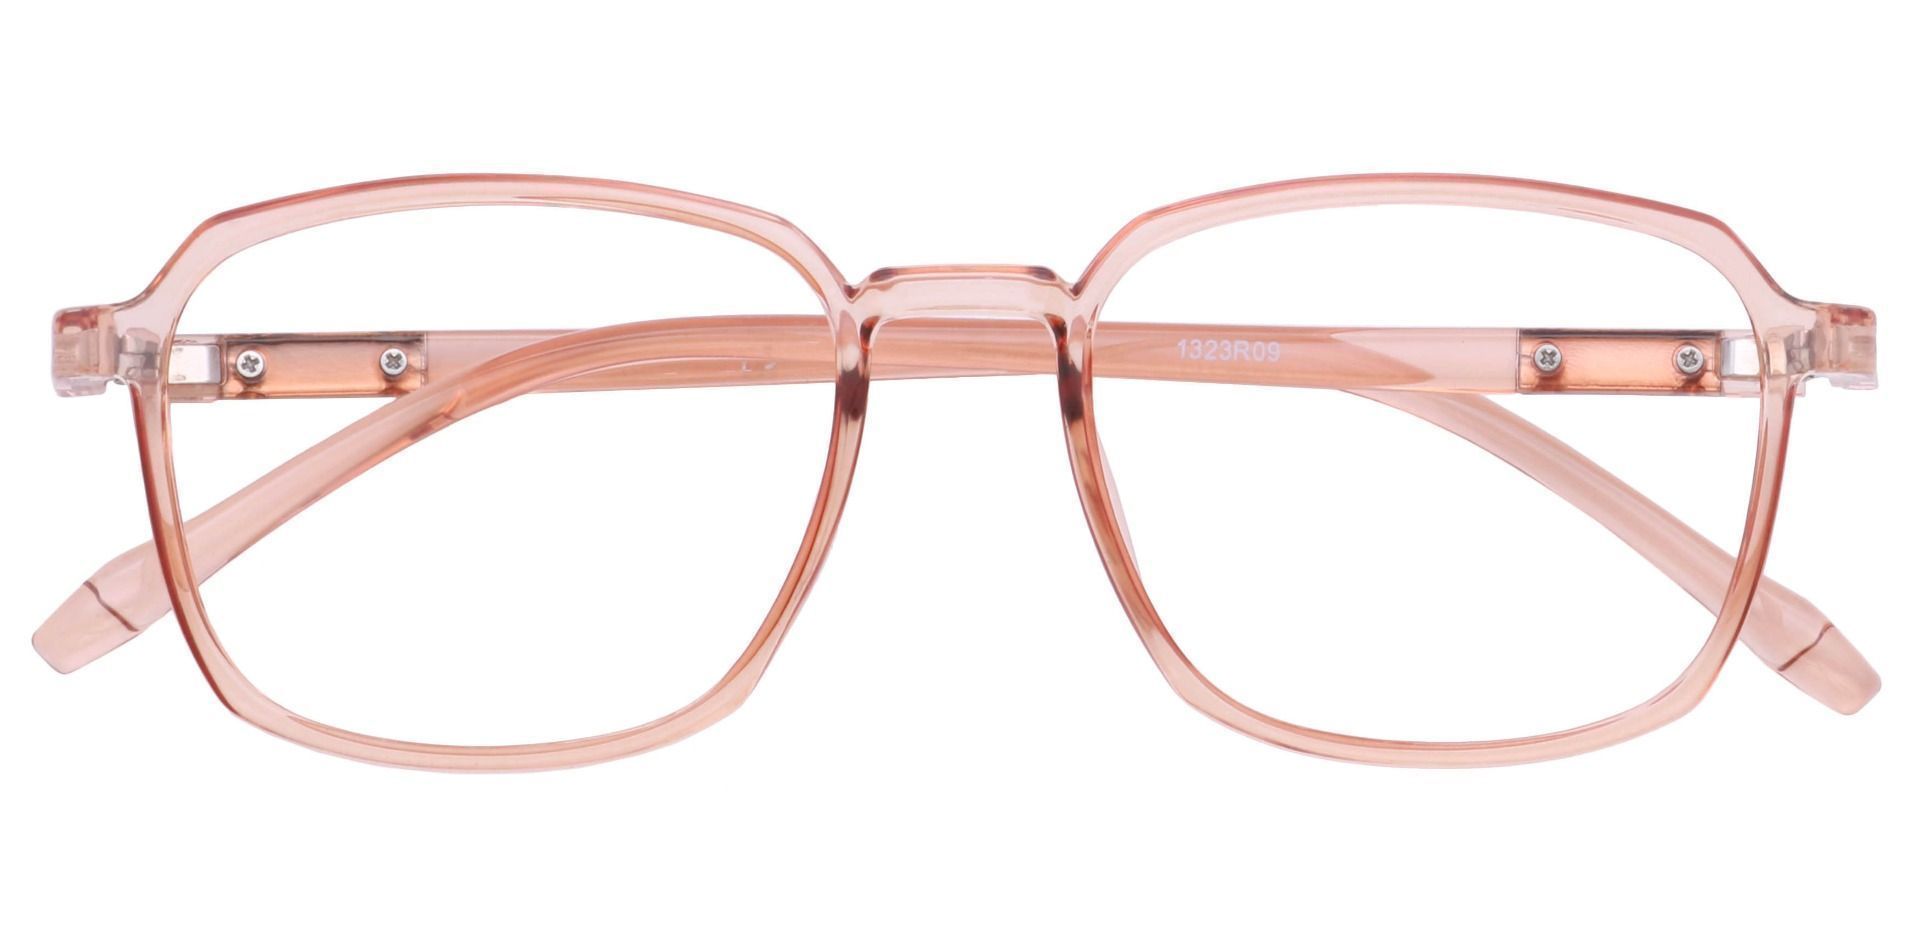 Stella Square Prescription Glasses - The Frame Is Red And Clear